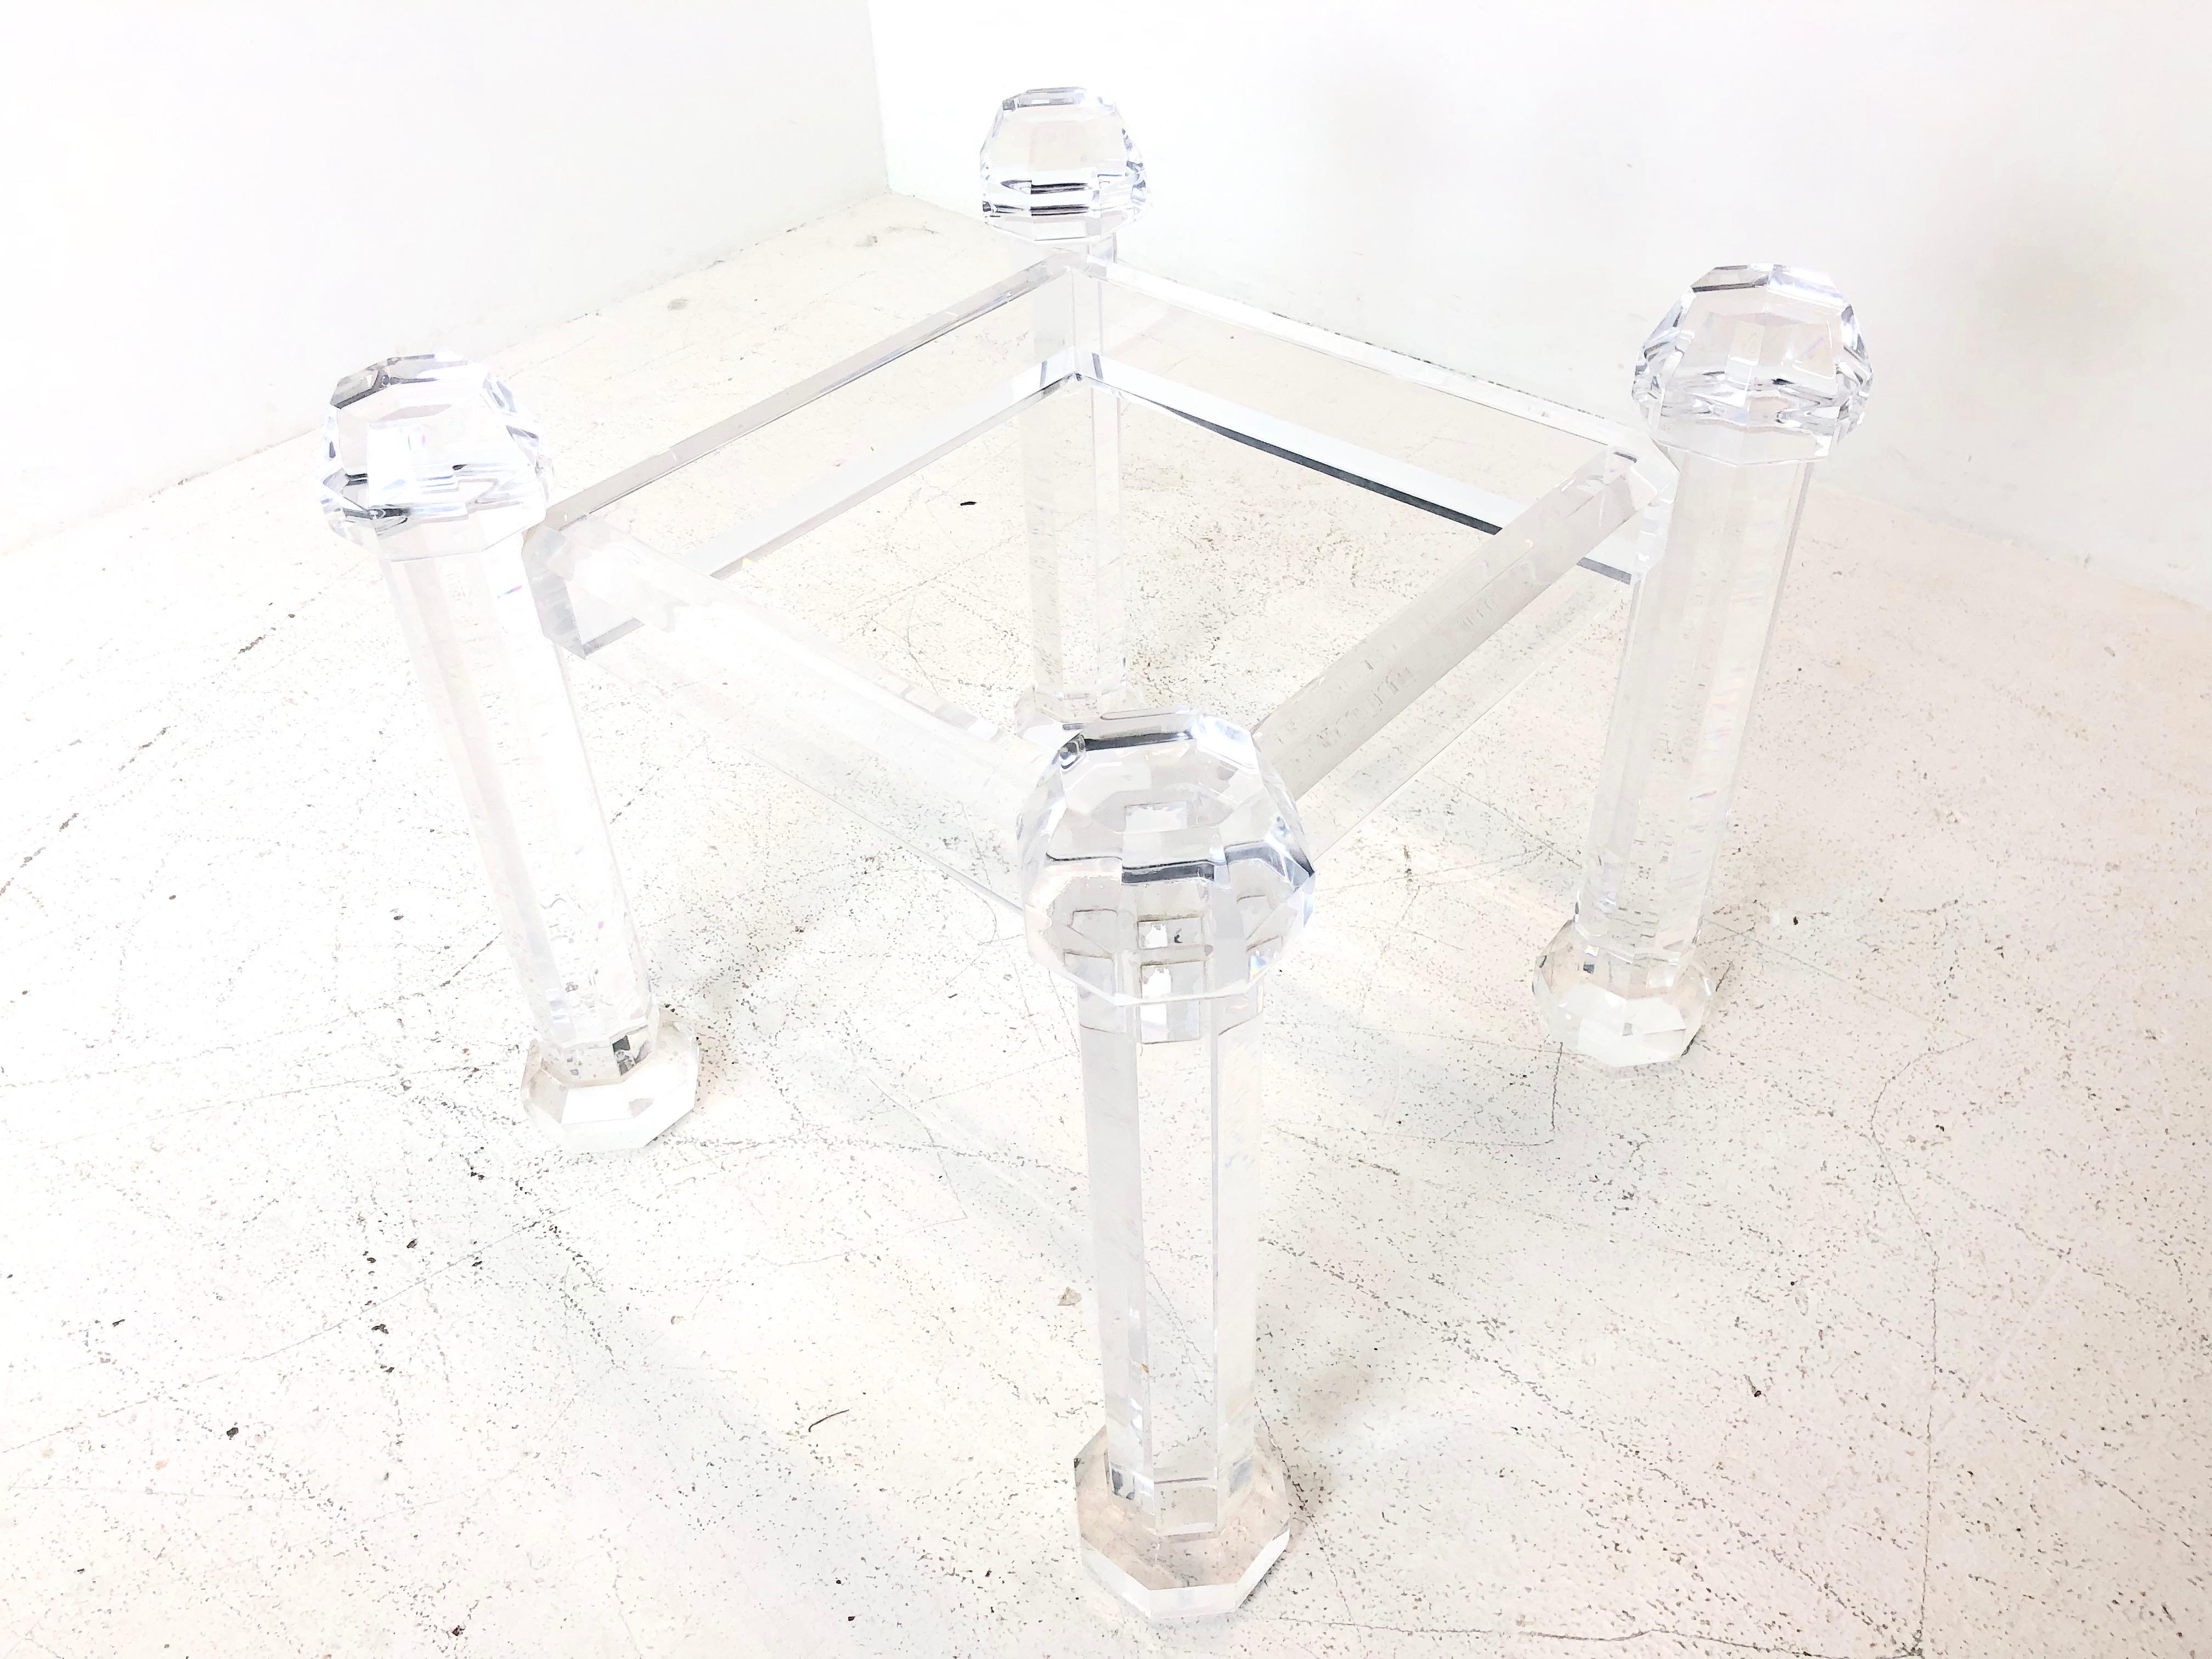 Prismatic Lucite dining table by Allan Knight. Table is in good condition with minimal discoloration around joints. Table has a 70